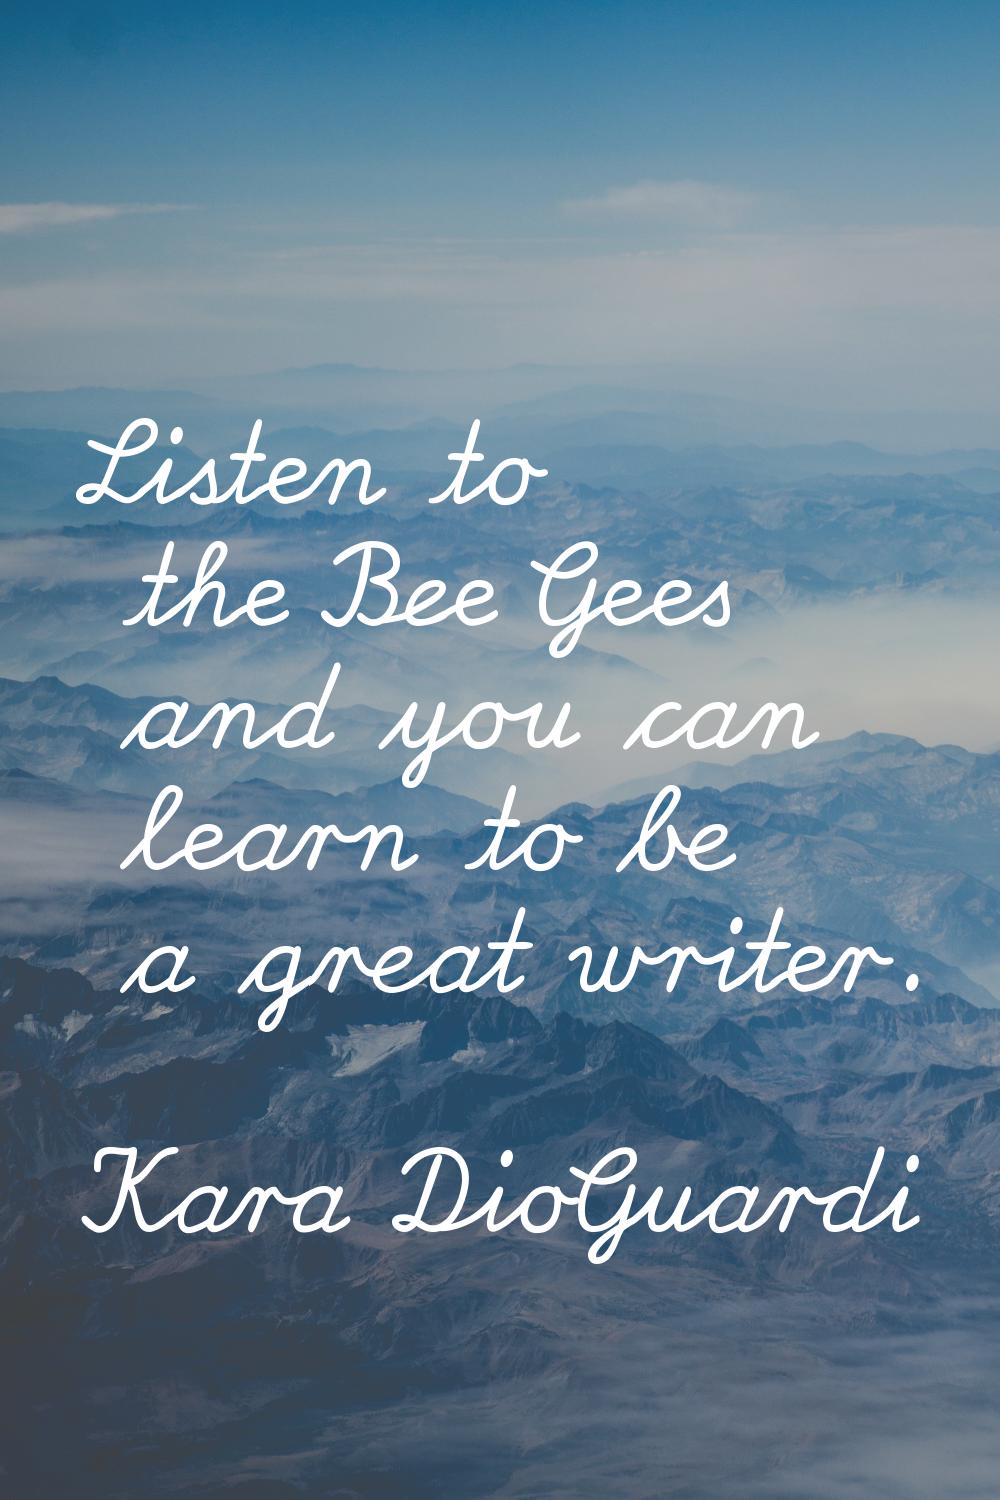 Listen to the Bee Gees and you can learn to be a great writer.